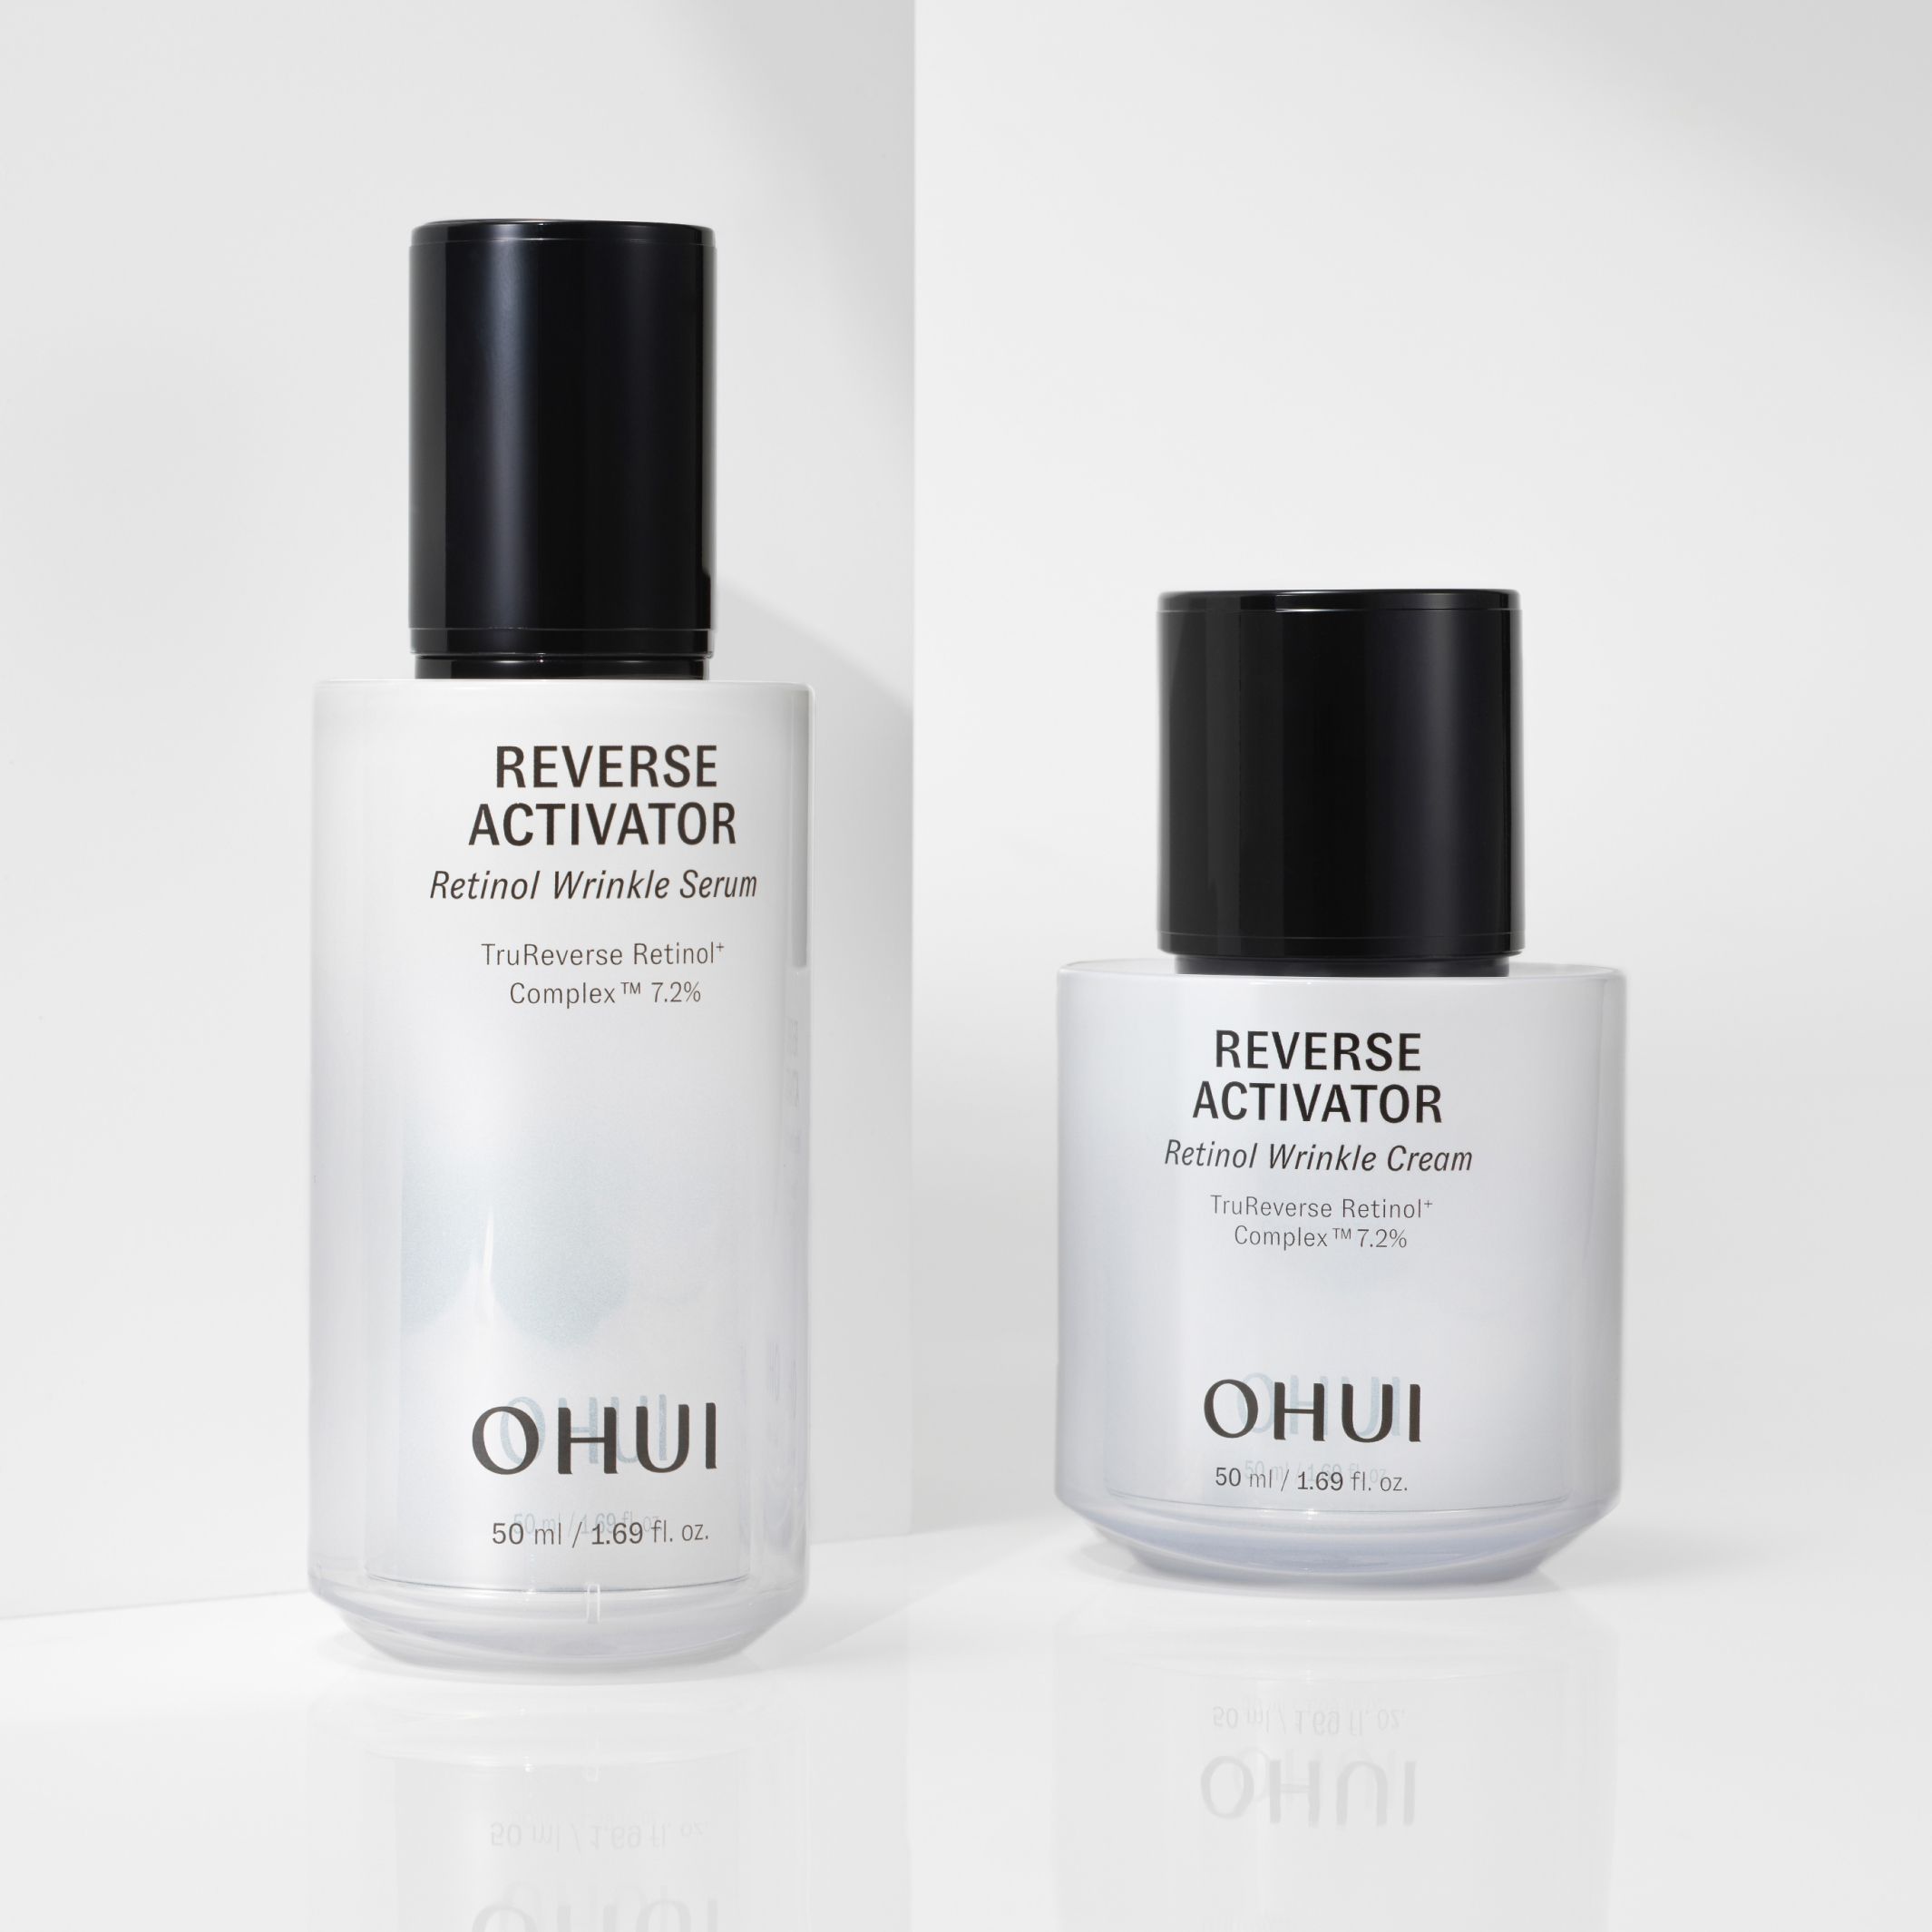 Two products from the OHUI Reverse Activator collection showcased against a white backdrop.